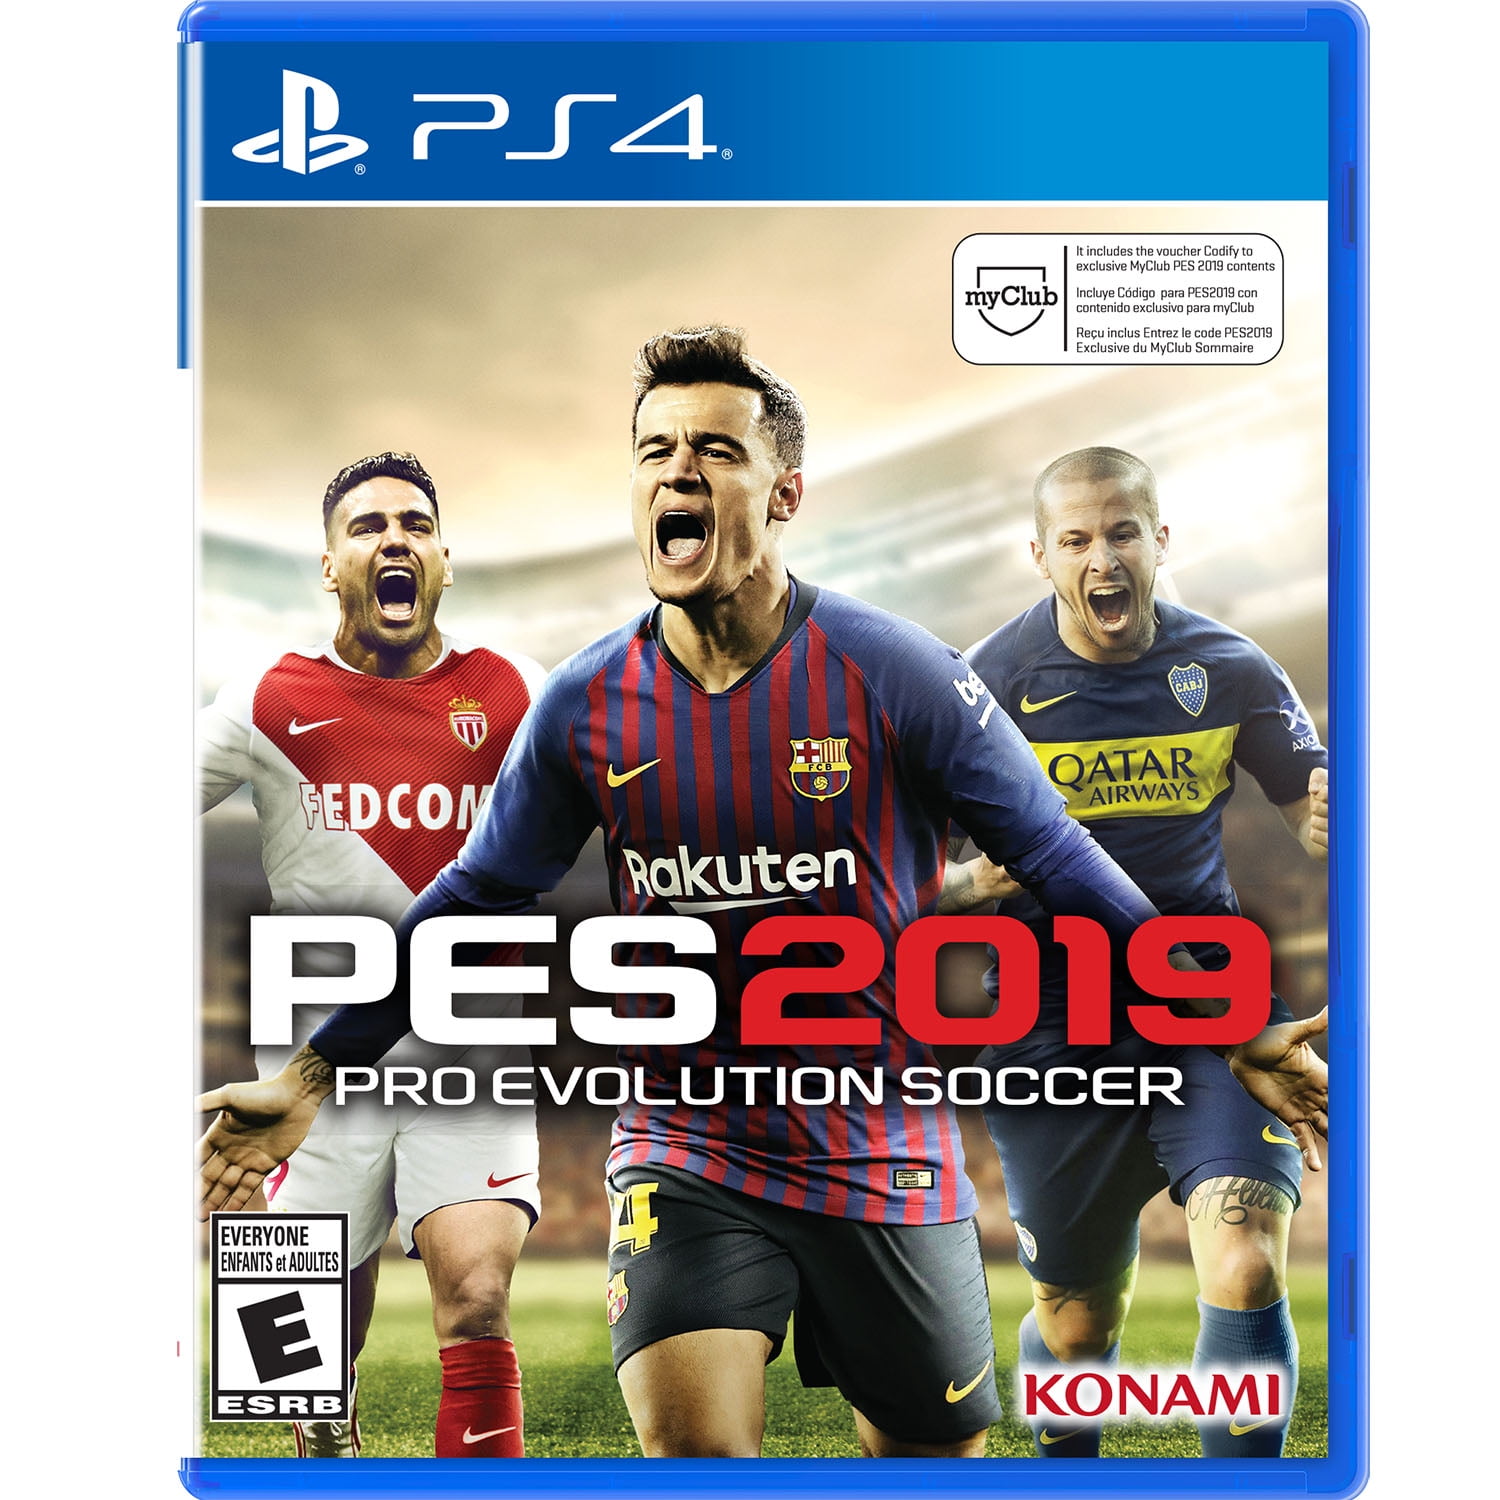 ps4 sports games 2019